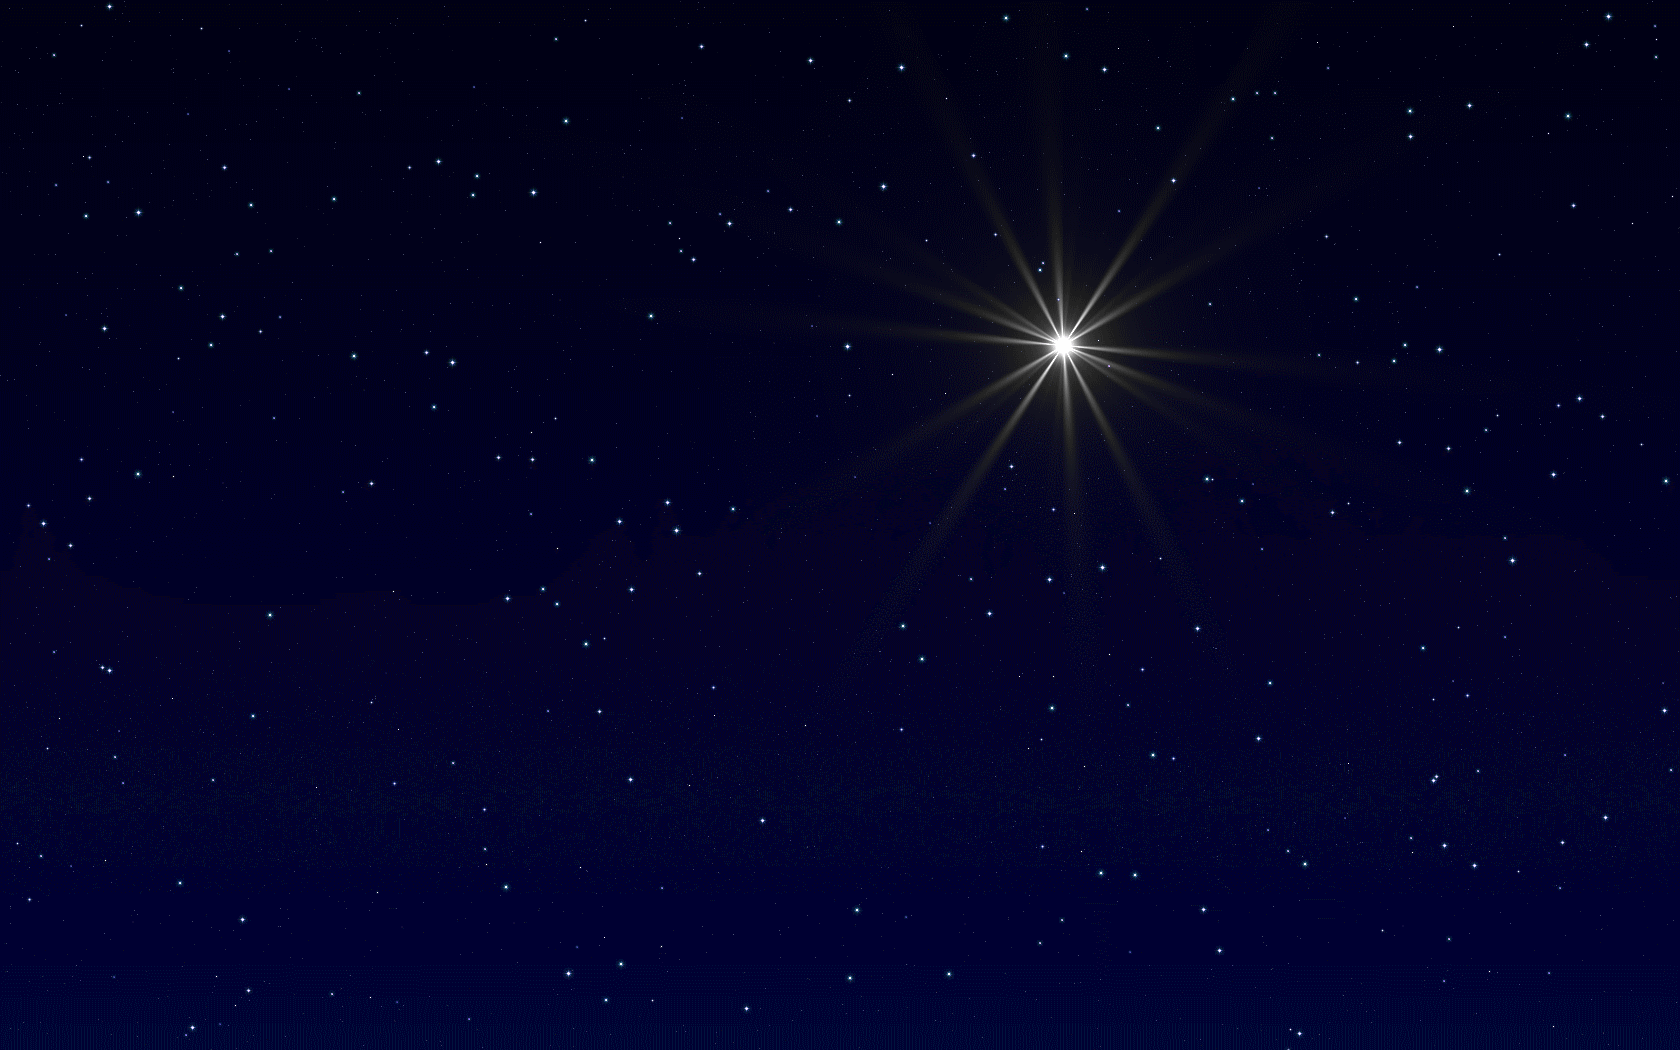 Gallery For Gt Christian Christmas Star Background